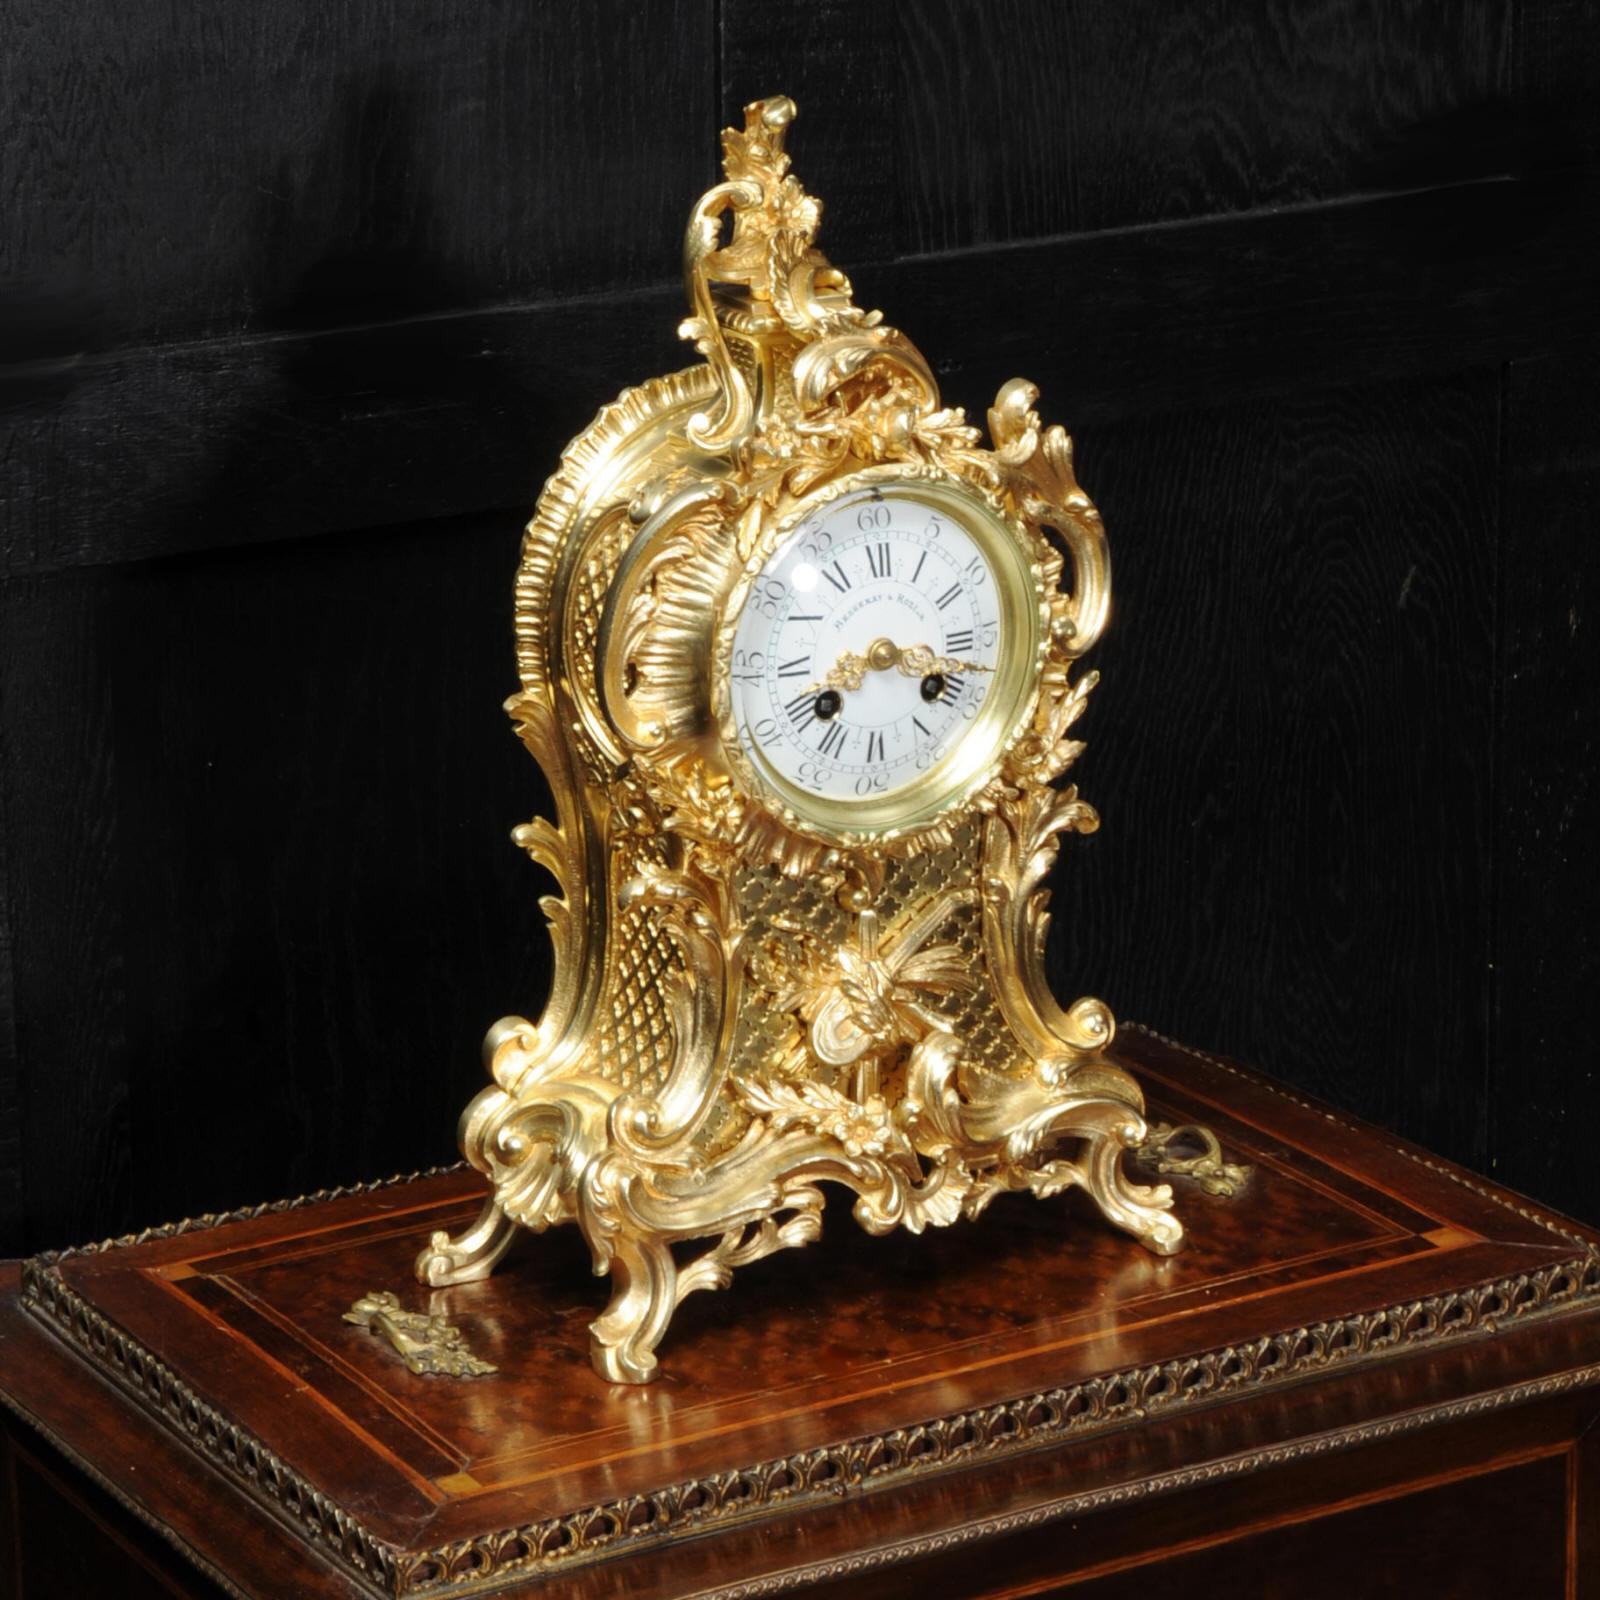 A lovely original antique French Rococo clock by Vincenti et Cie, circa 1880. Flamboyantly modelled in gilded bronze, waisted case with with swirling acanthus, 'c' scrolls and floral swags. To the front is a panel of fret work with a motif of